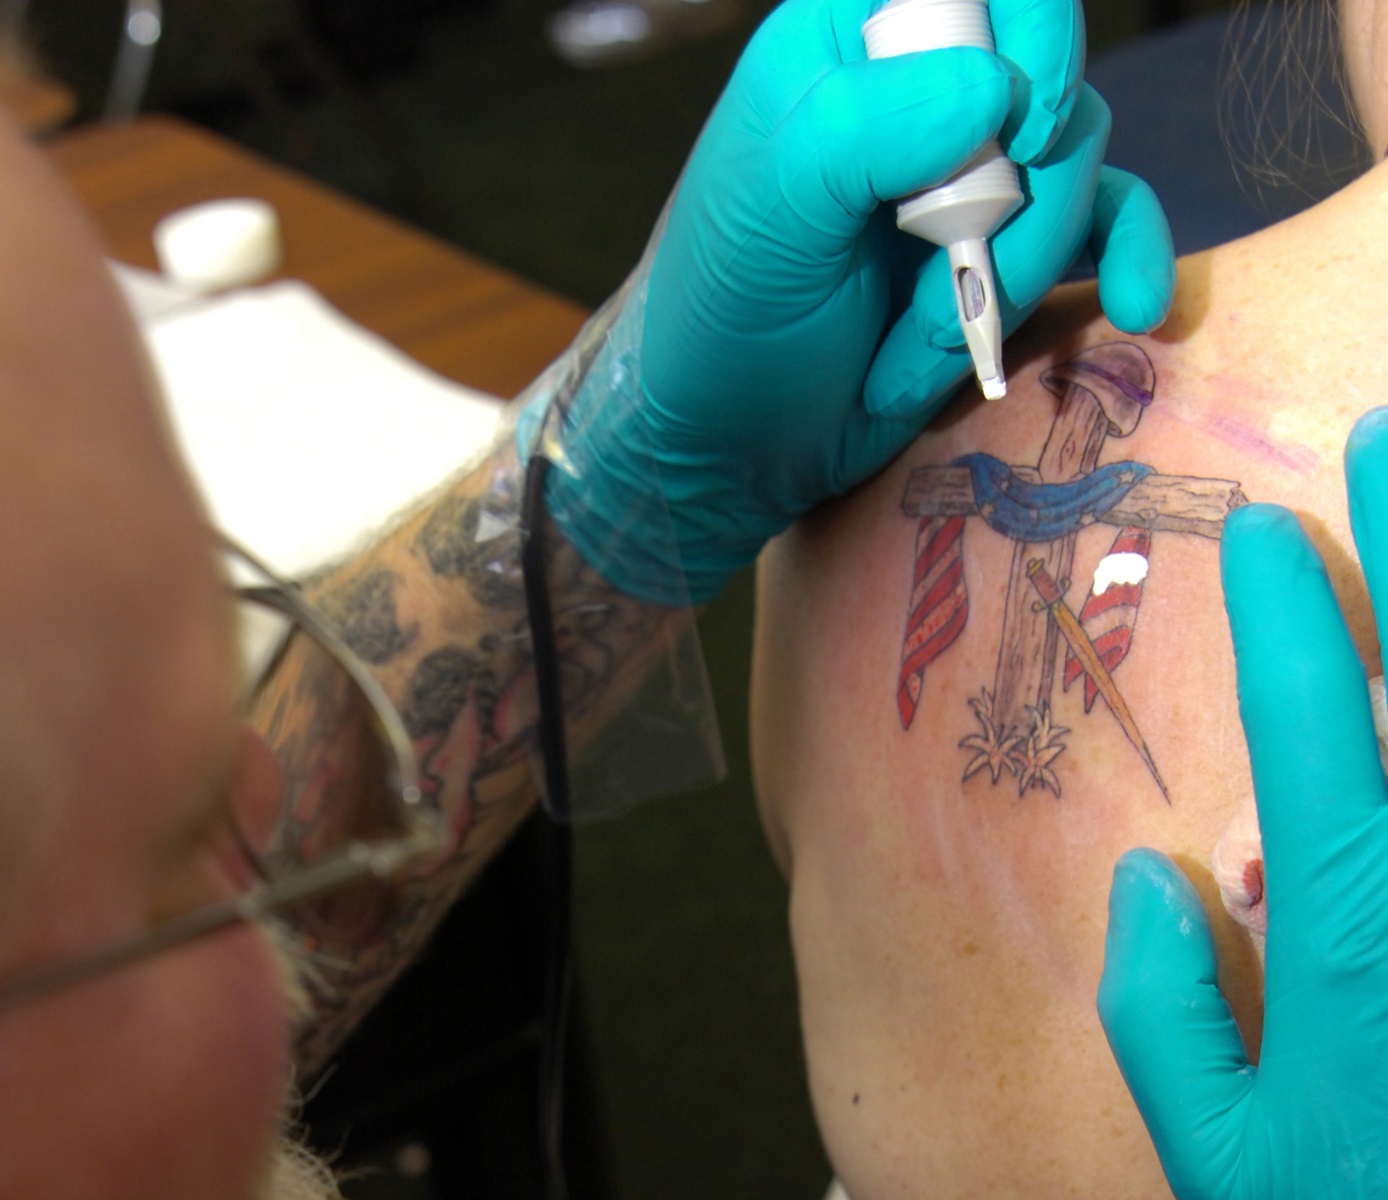 USMC Delivers New Policies for Tattoos